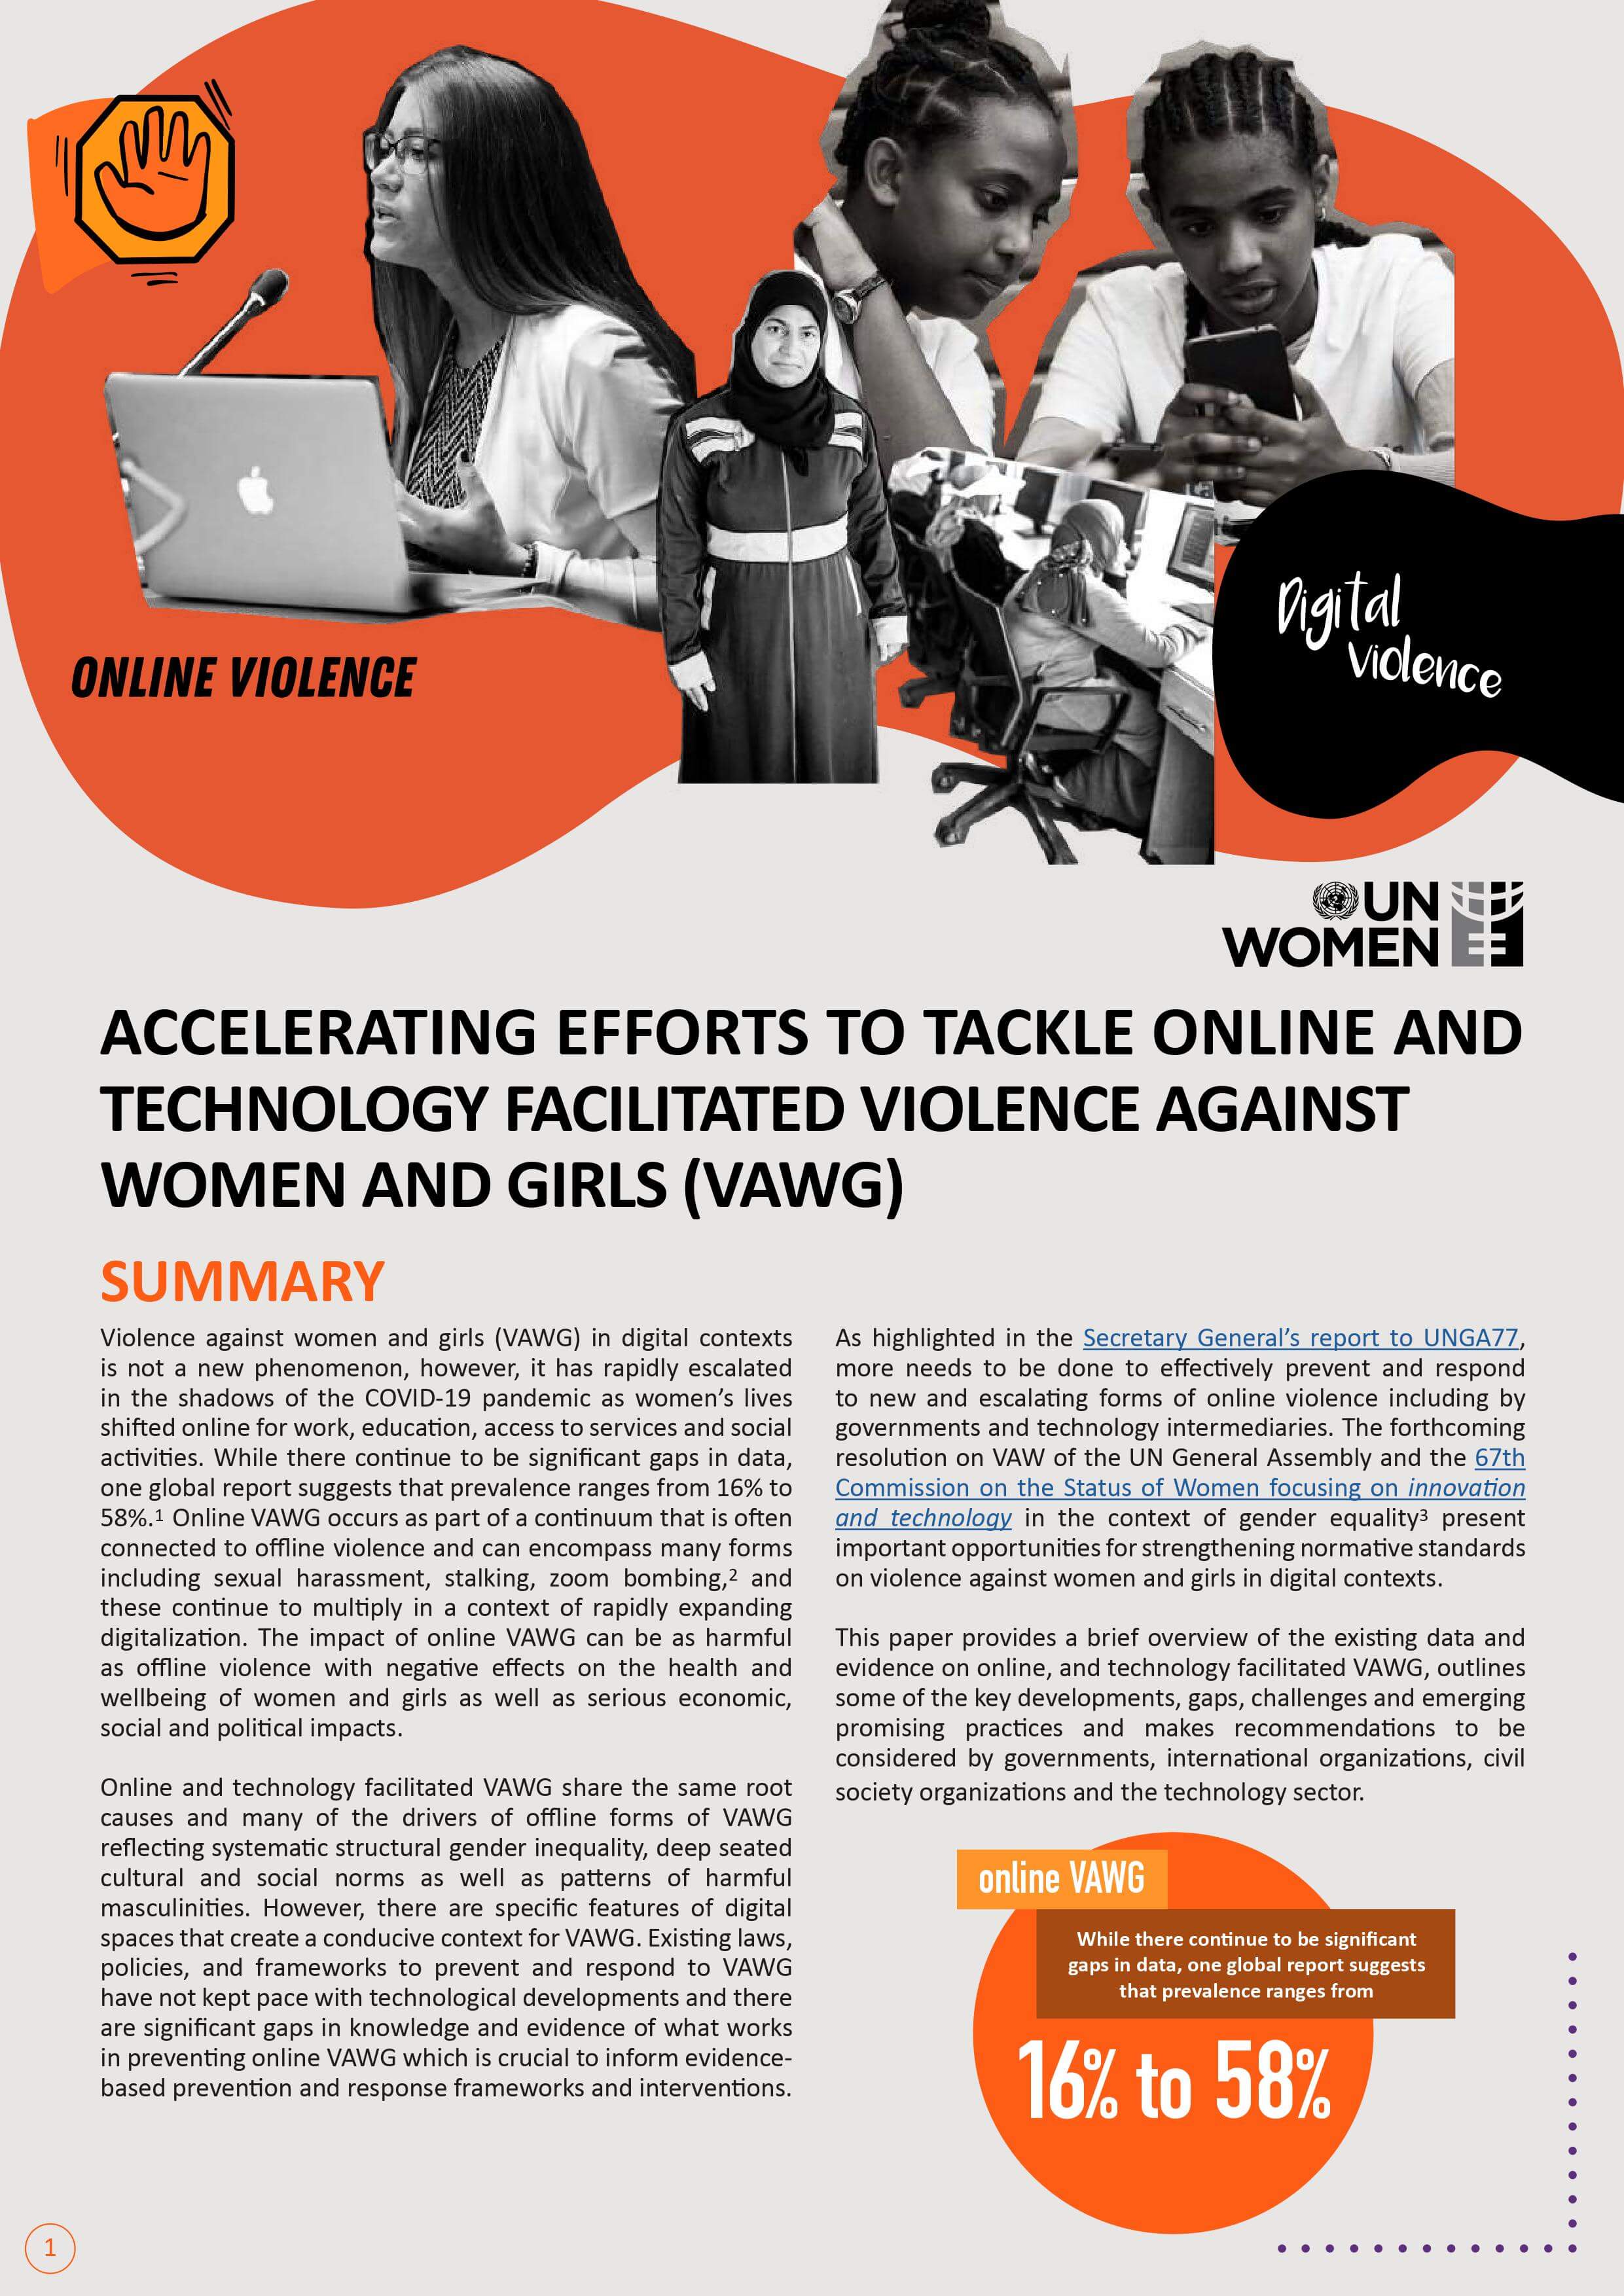 Accelerating efforts to tackle online and technology-facilitated violence  against women and girls | Publications | UN Women – Headquarters